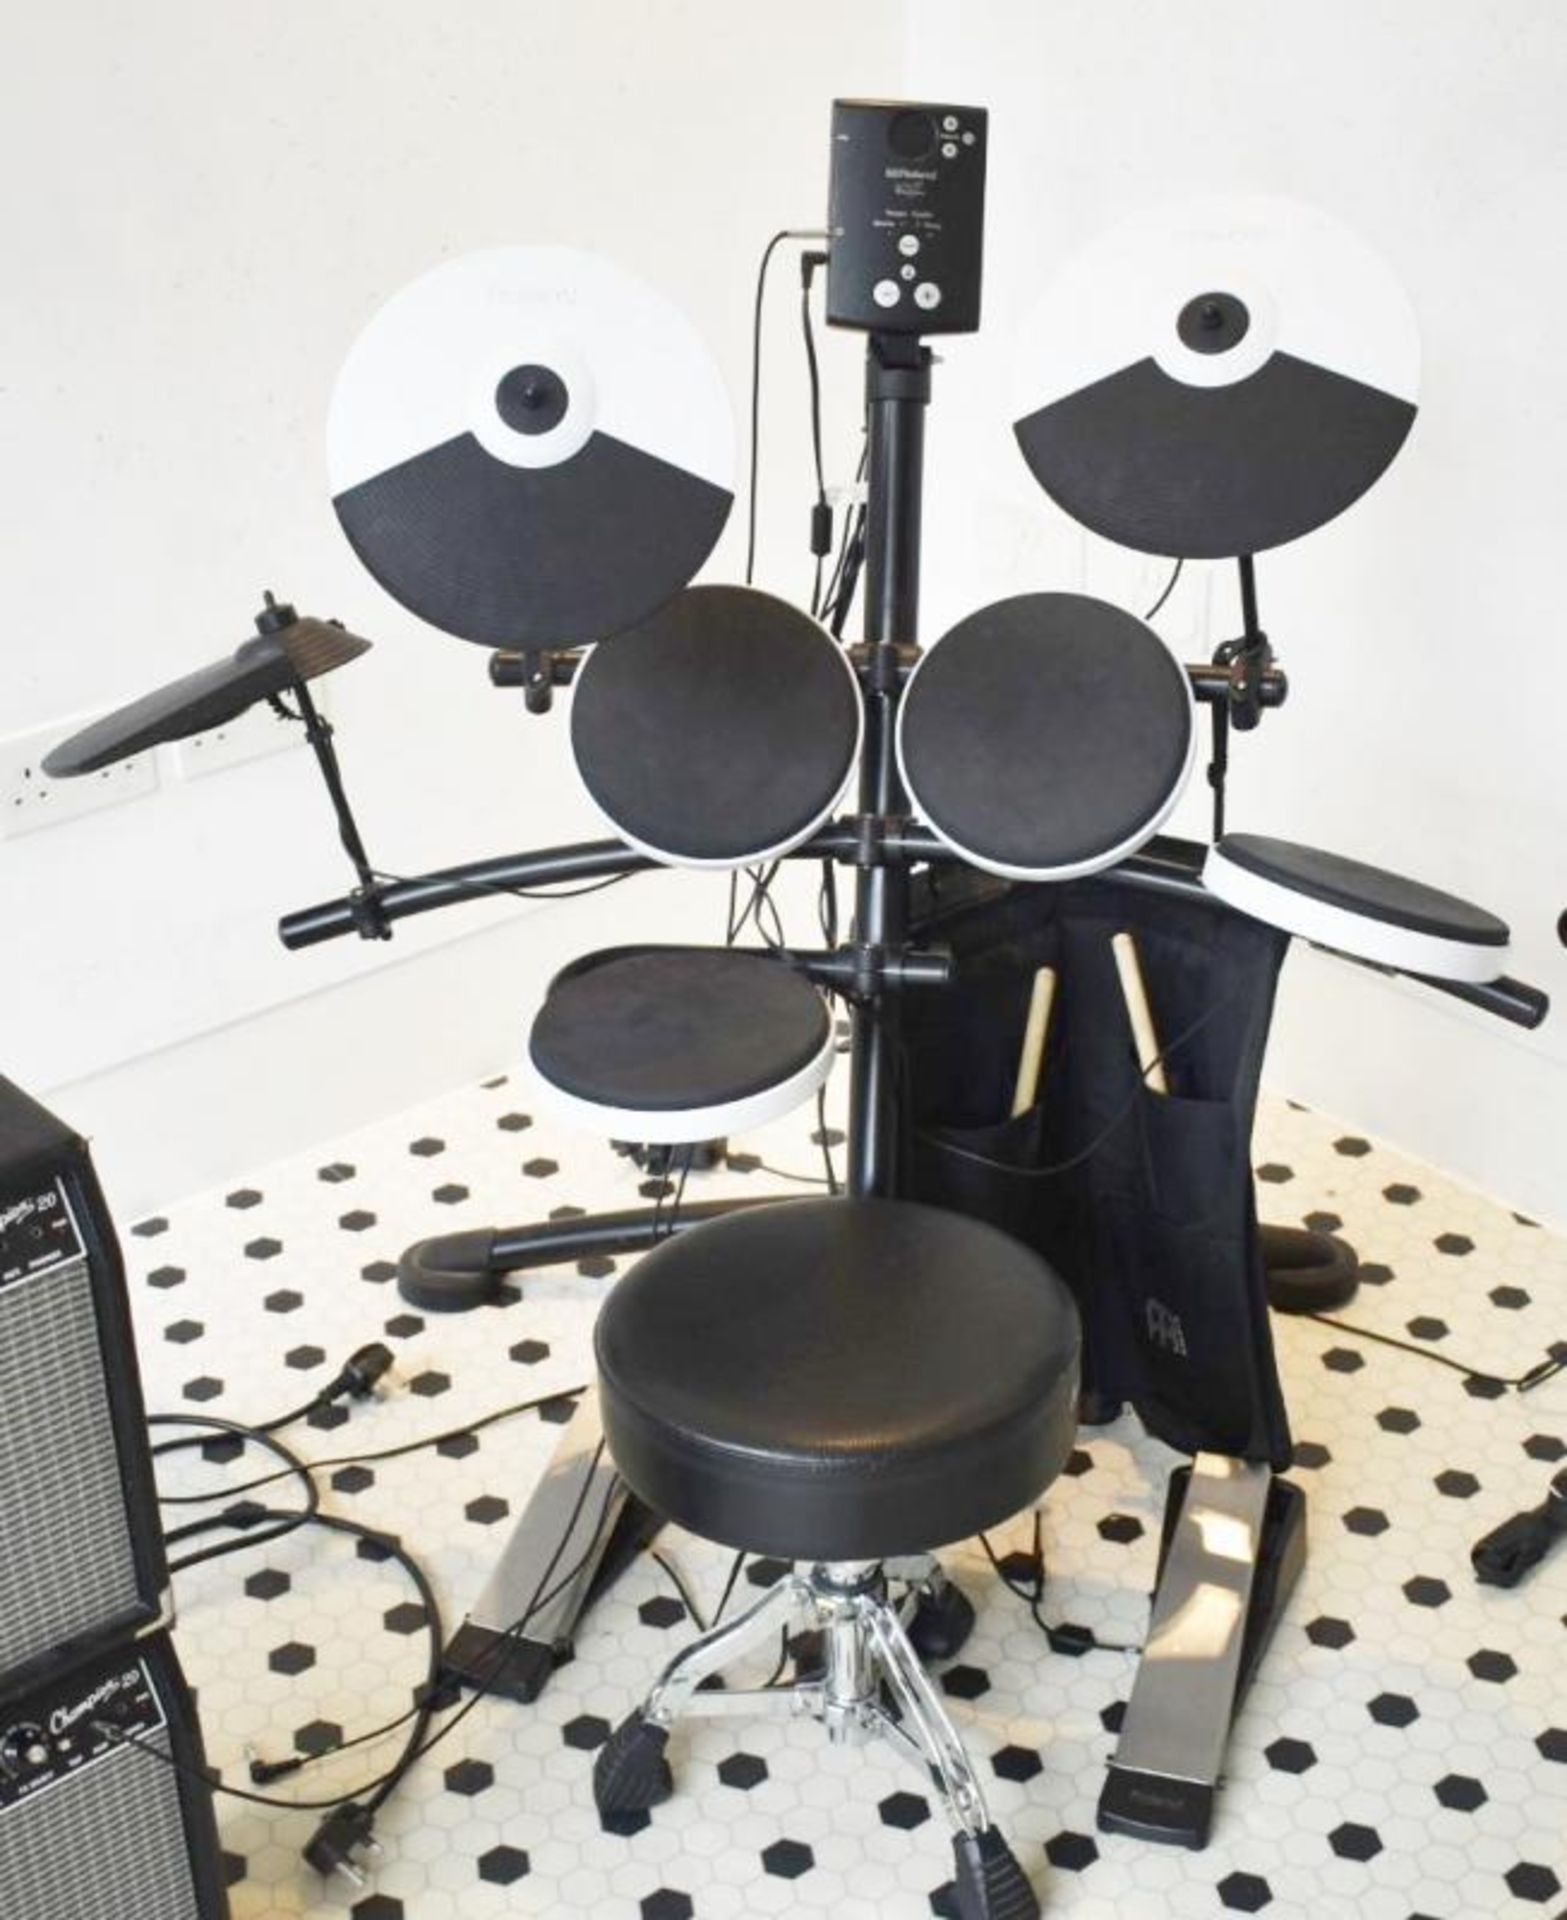 1 x Roland V-Drums Electronic Drum Kit With Stool and Stick Bag - Ref KP103 - CL489 - Location: Putn